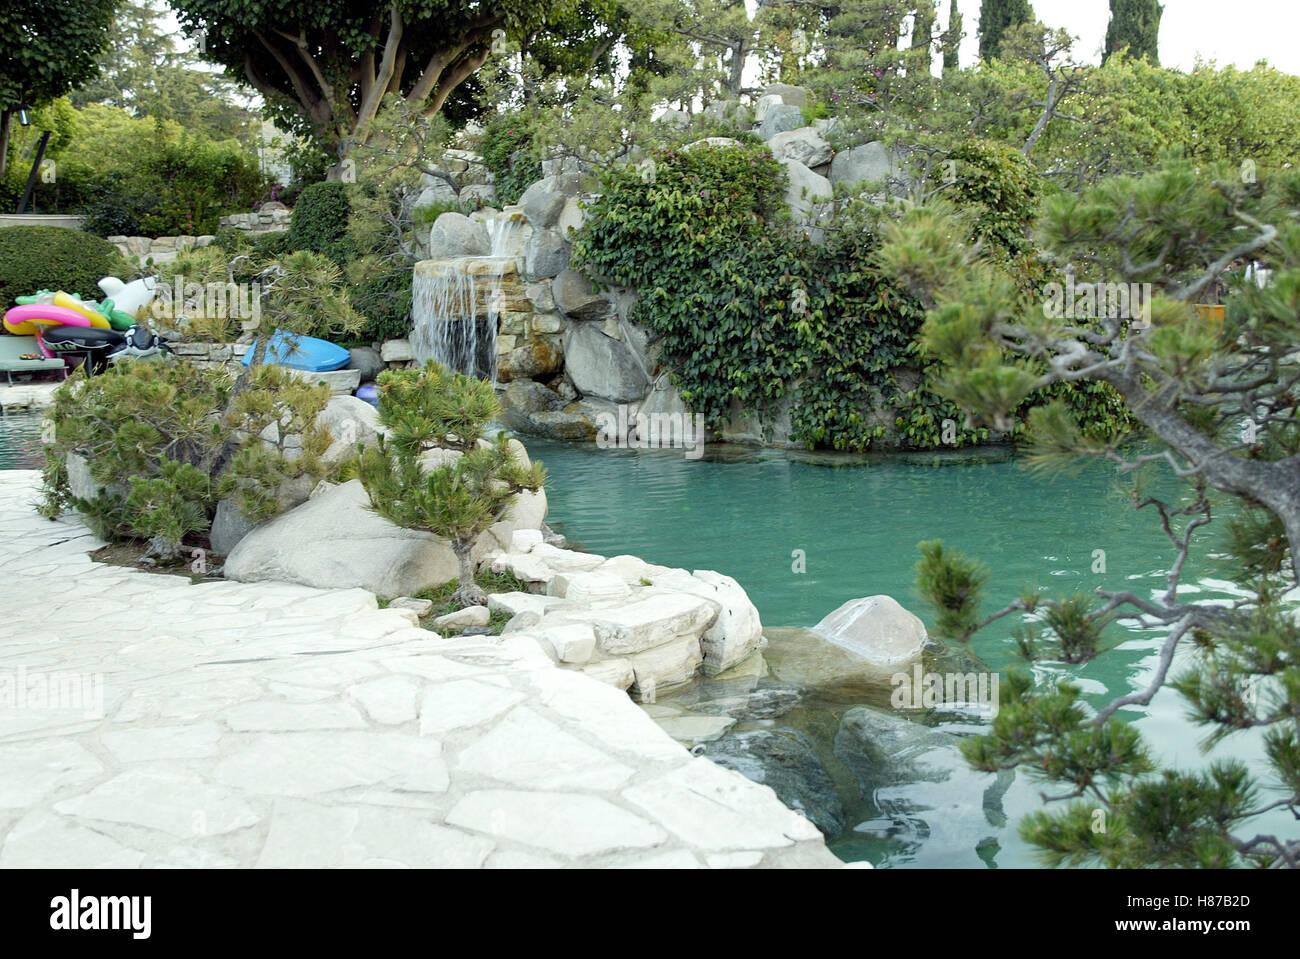 POOL PLAYBOY MANSION CATCHES FASHIO PLAYBOY MANSION LOS ANGELES USA 15 May 2003 Stock Photo